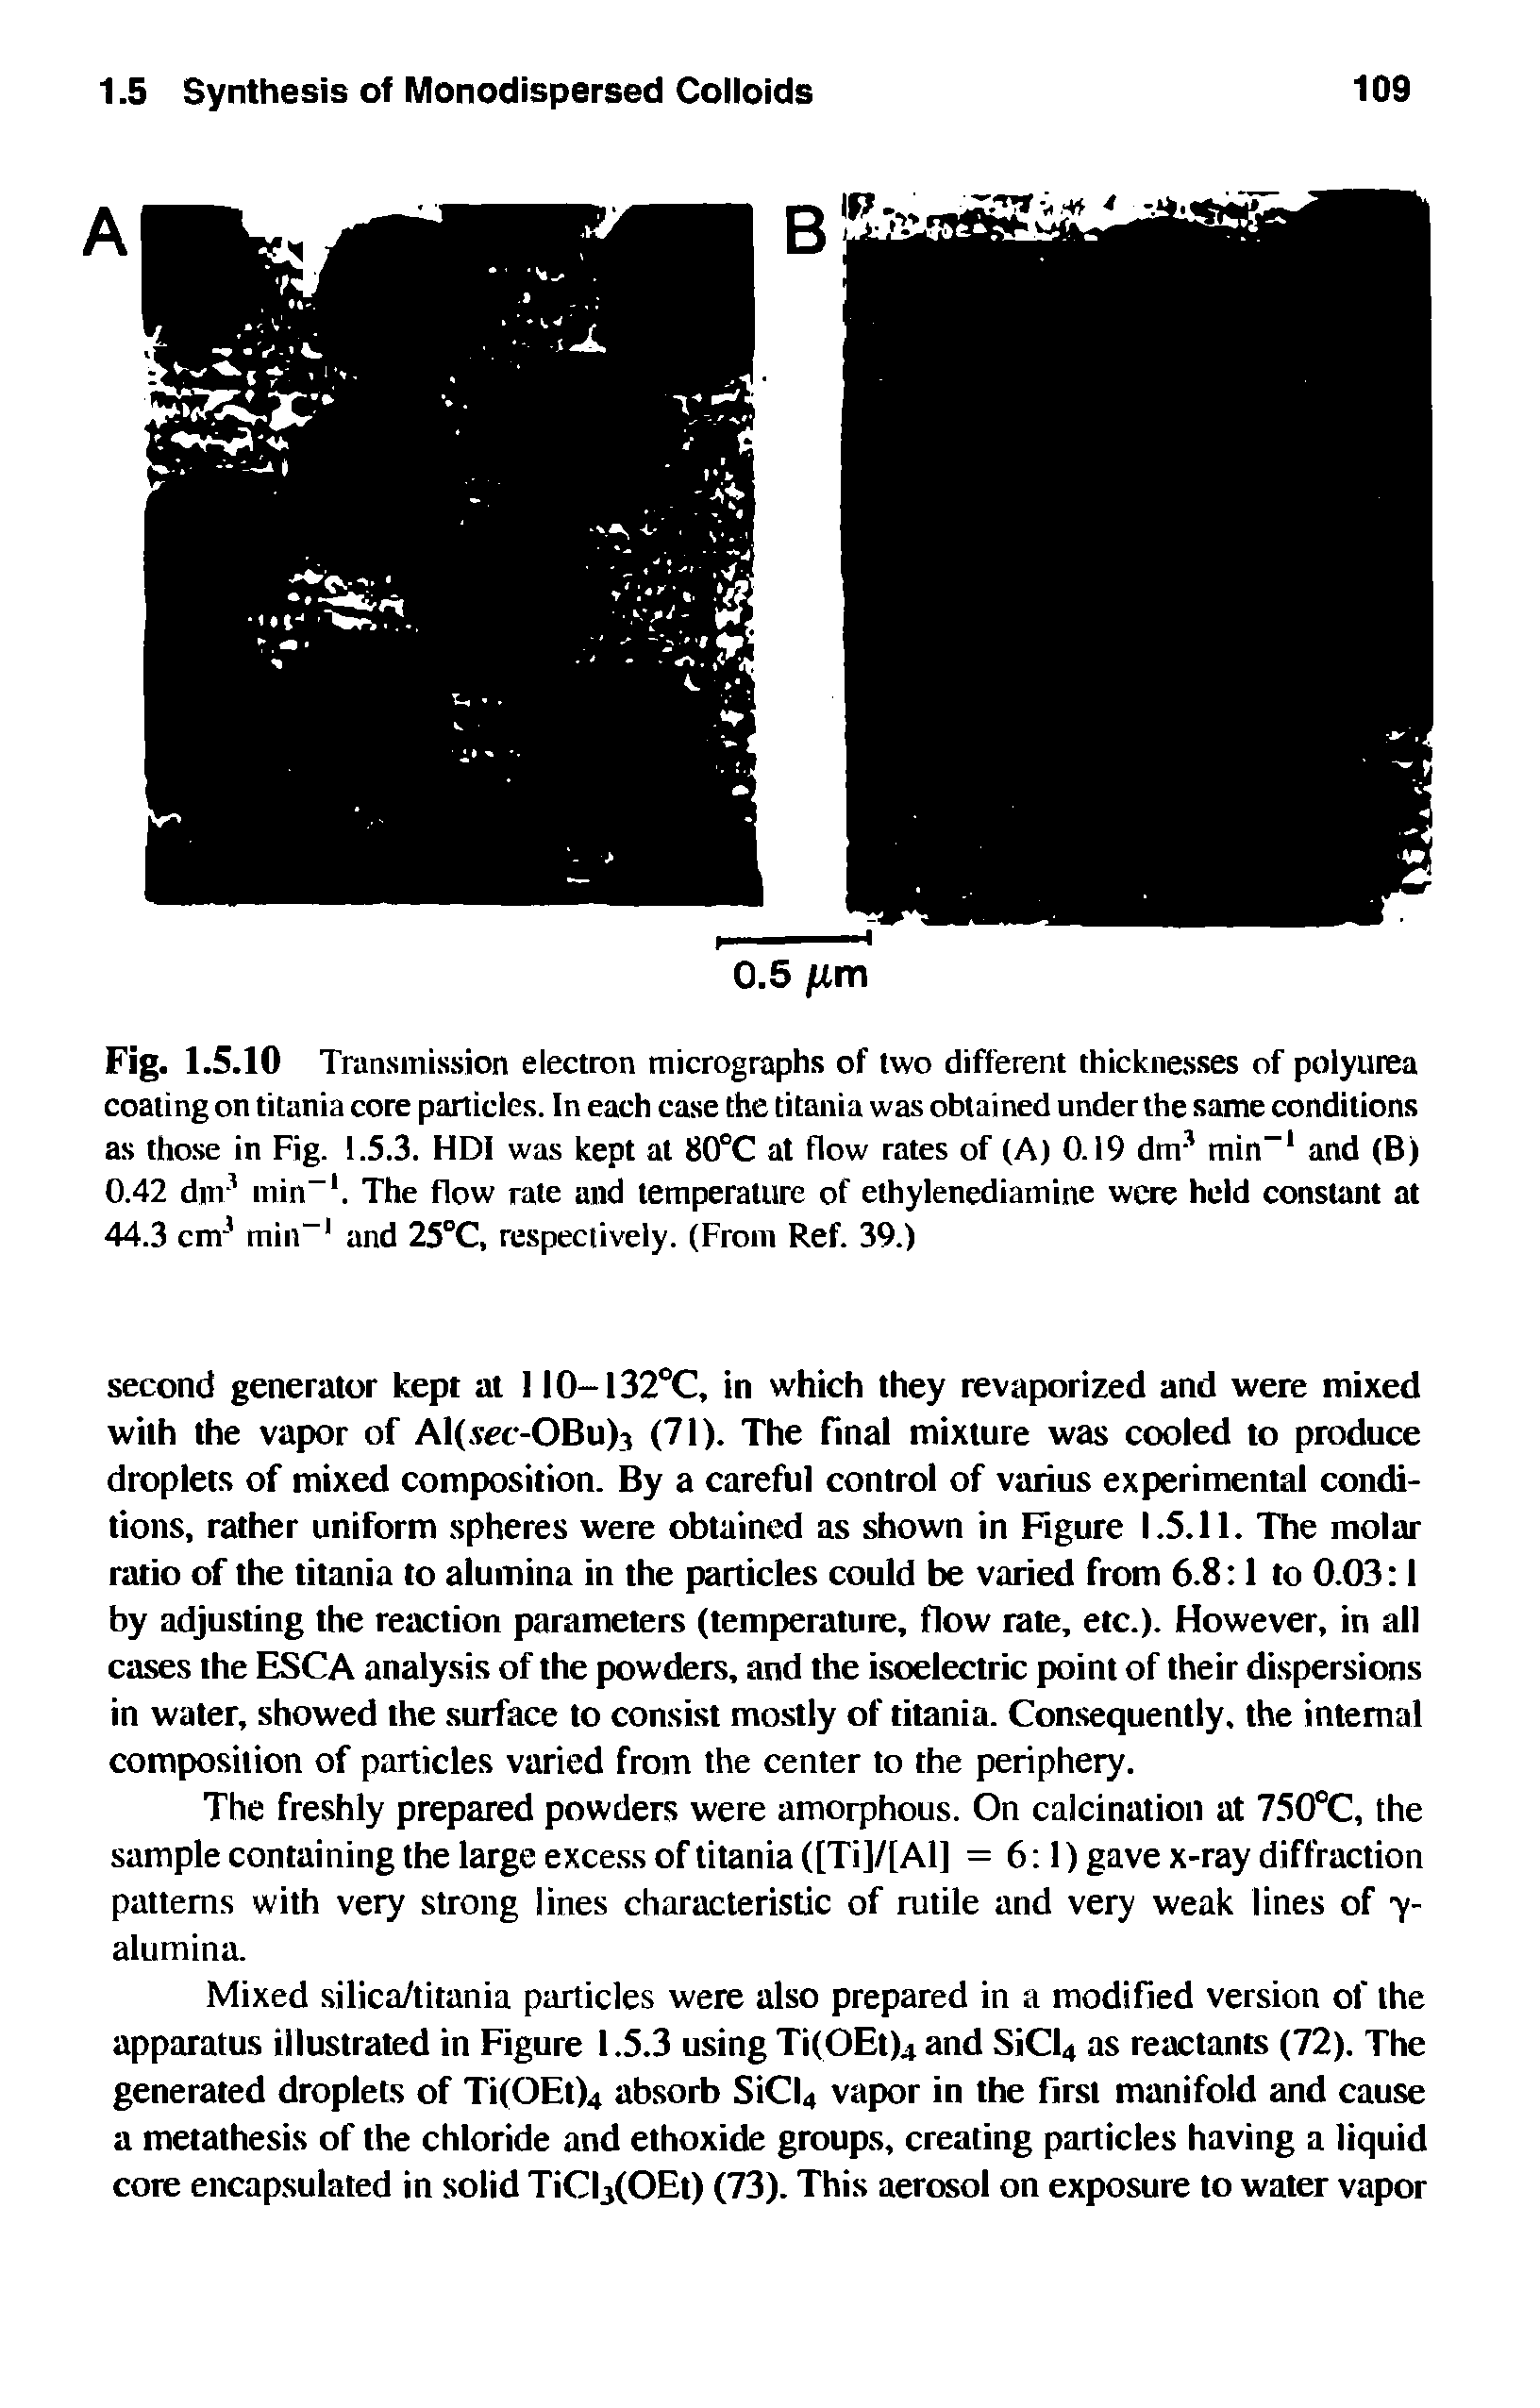 Fig. 1.5.10 Transmission electron micrographs of two different thicknesses of polyurea coating on titania core particles. In each case the titania was obtained under the same conditions as those in Fig. 1.5.3. HDI was kept at 80°C at flow rates of (A) 0.19 dm3 min-1 and (B) 0.42 dur1 min-1. The flow rate and temperature of ethylenediamine were held constant at 44.3 cmJ min-1 and 25°C, respectively. (From Ref. 39.)...